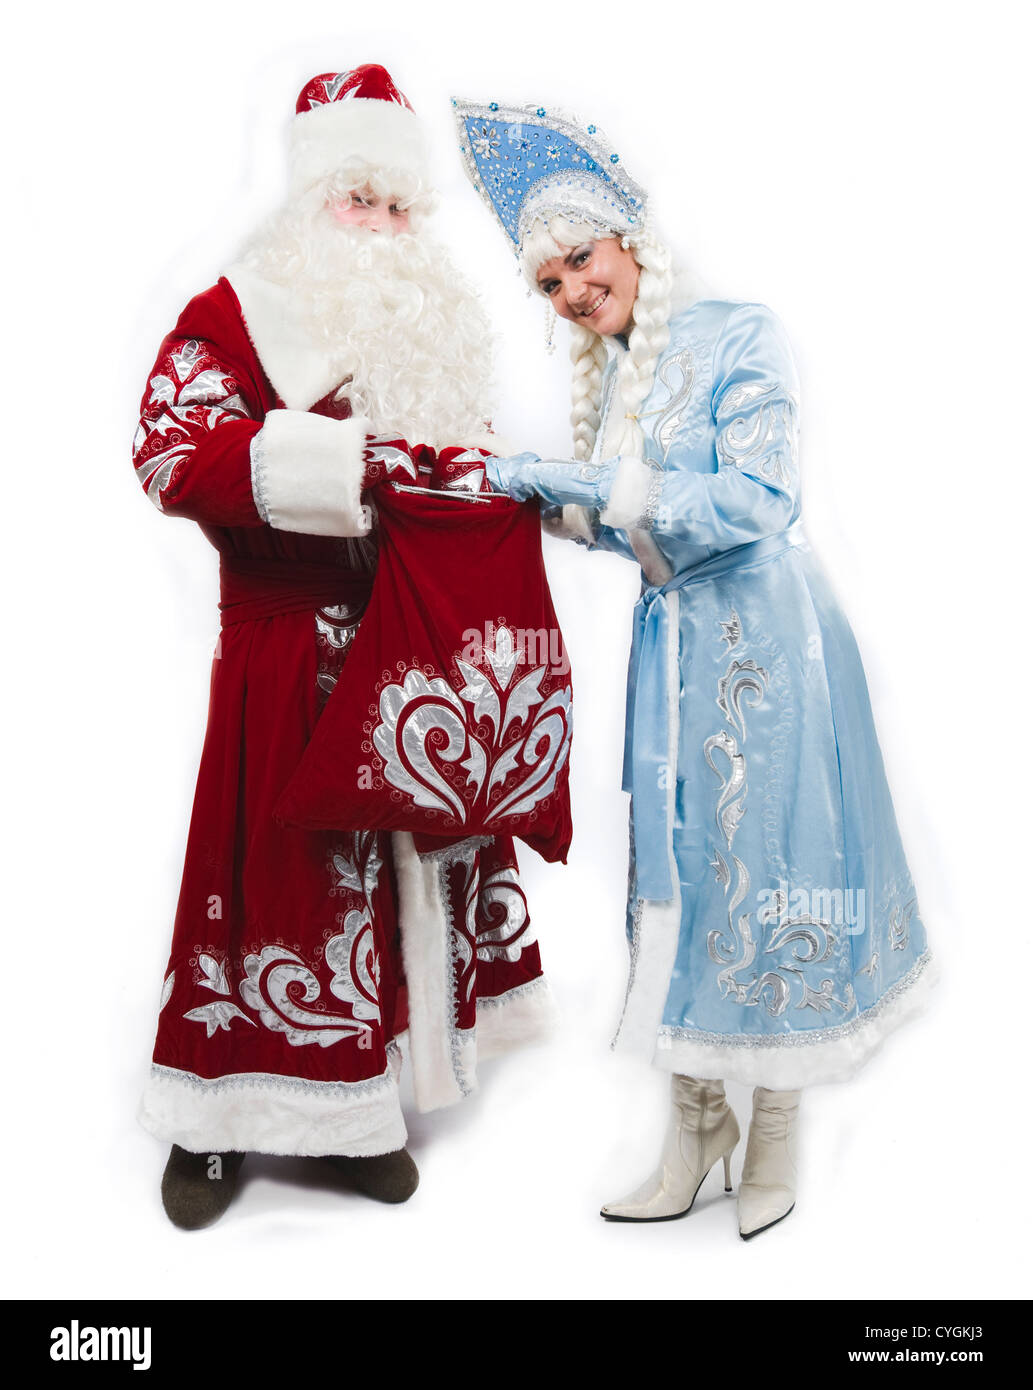 Father Frost (Santa) with Snegurochka (Snow Maiden) - traditional russian companion of Father Frost (Santa Claus) Stock Photo